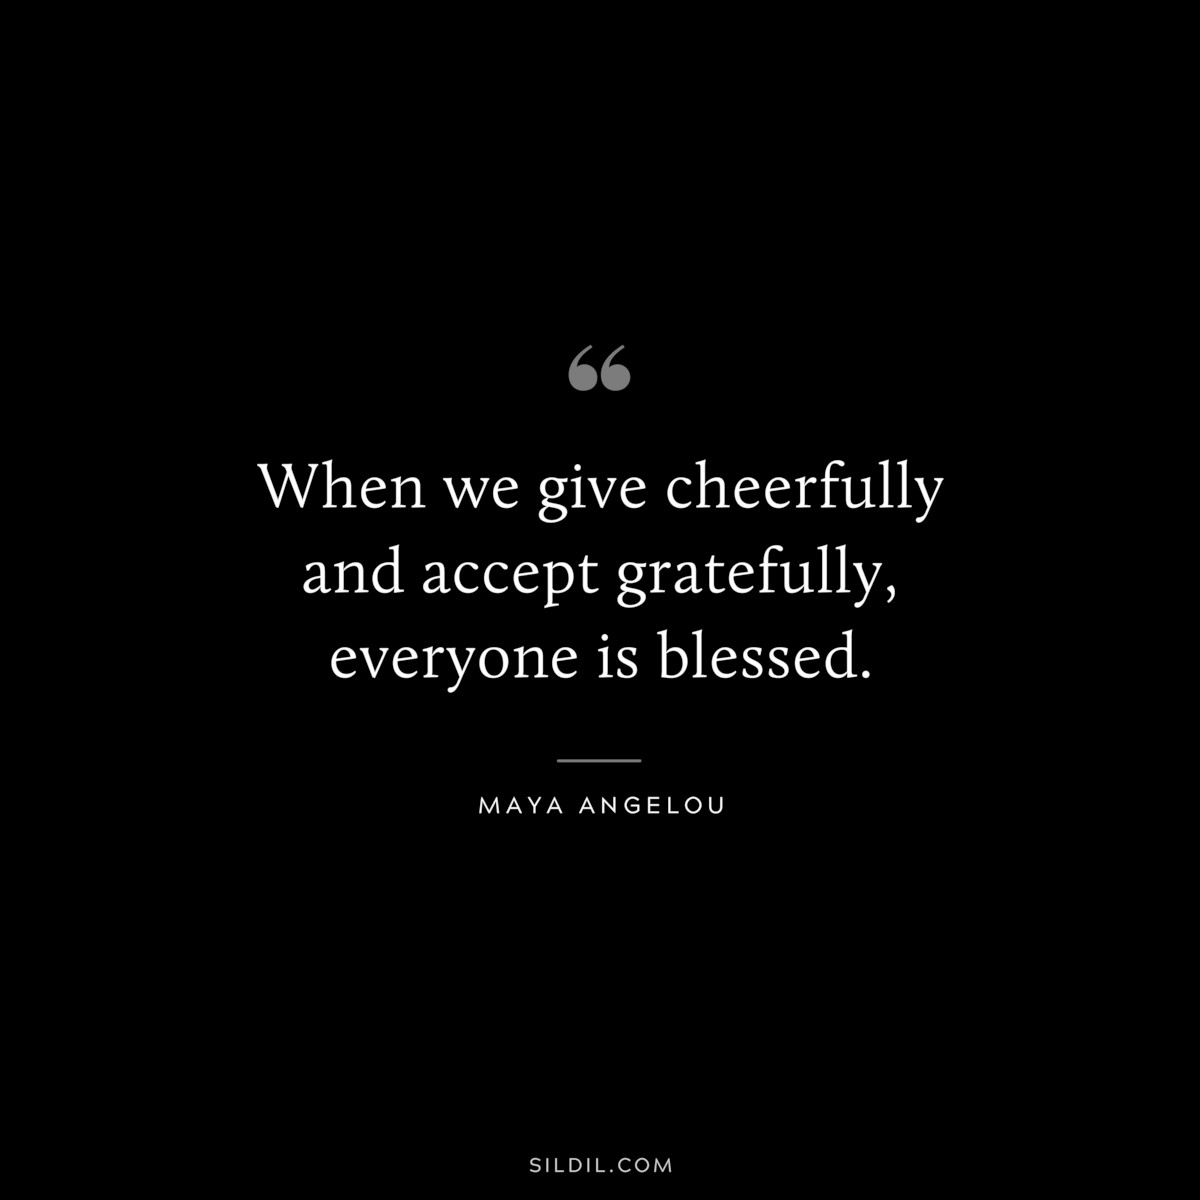 When we give cheerfully and accept gratefully, everyone is blessed. ― Maya Angelou